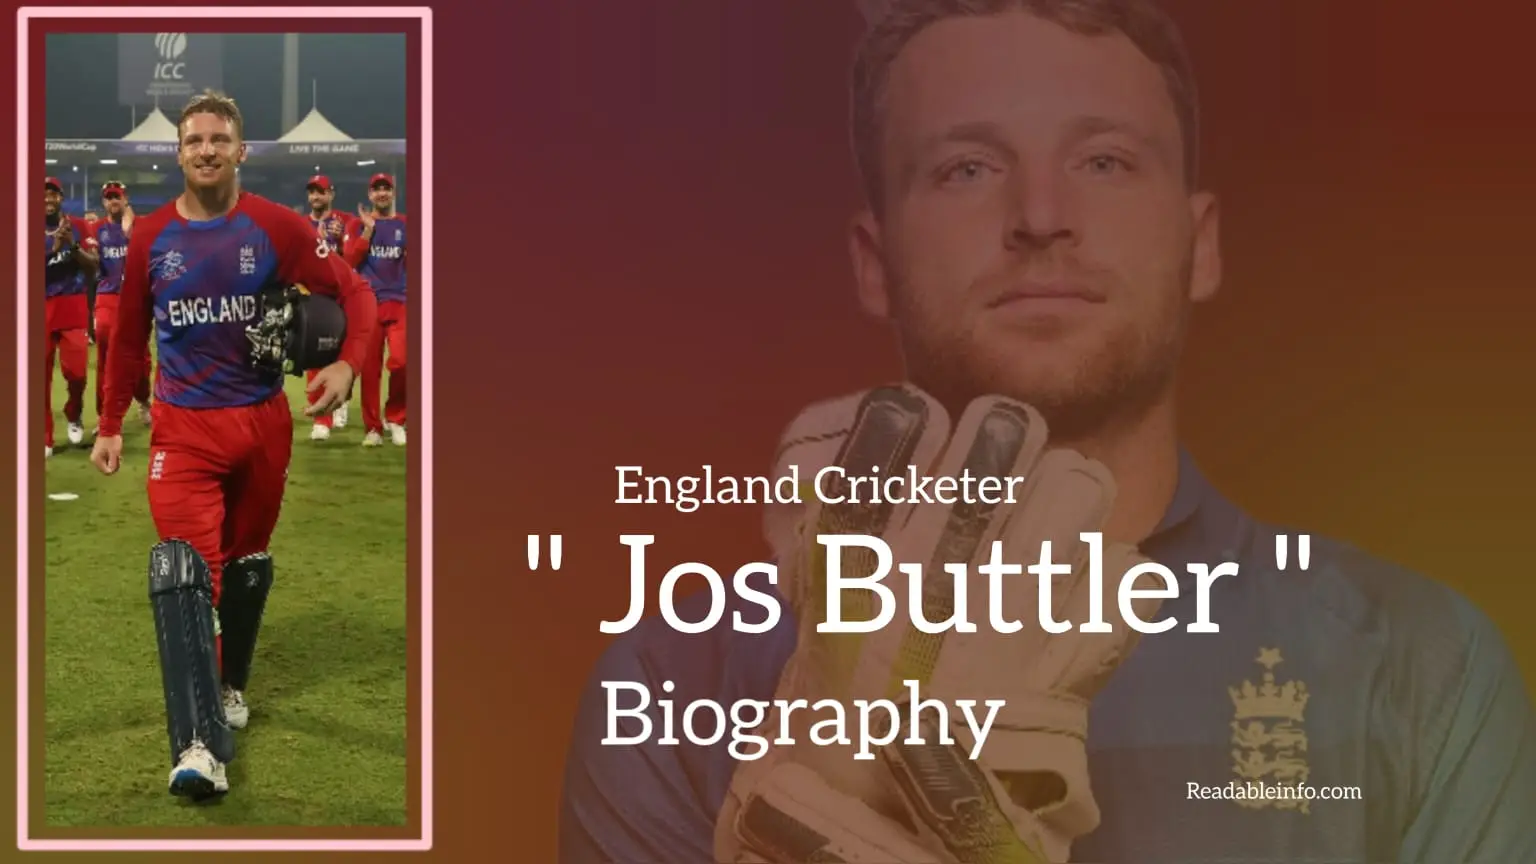 You are currently viewing Jos Buttler Biography (England Cricketer)